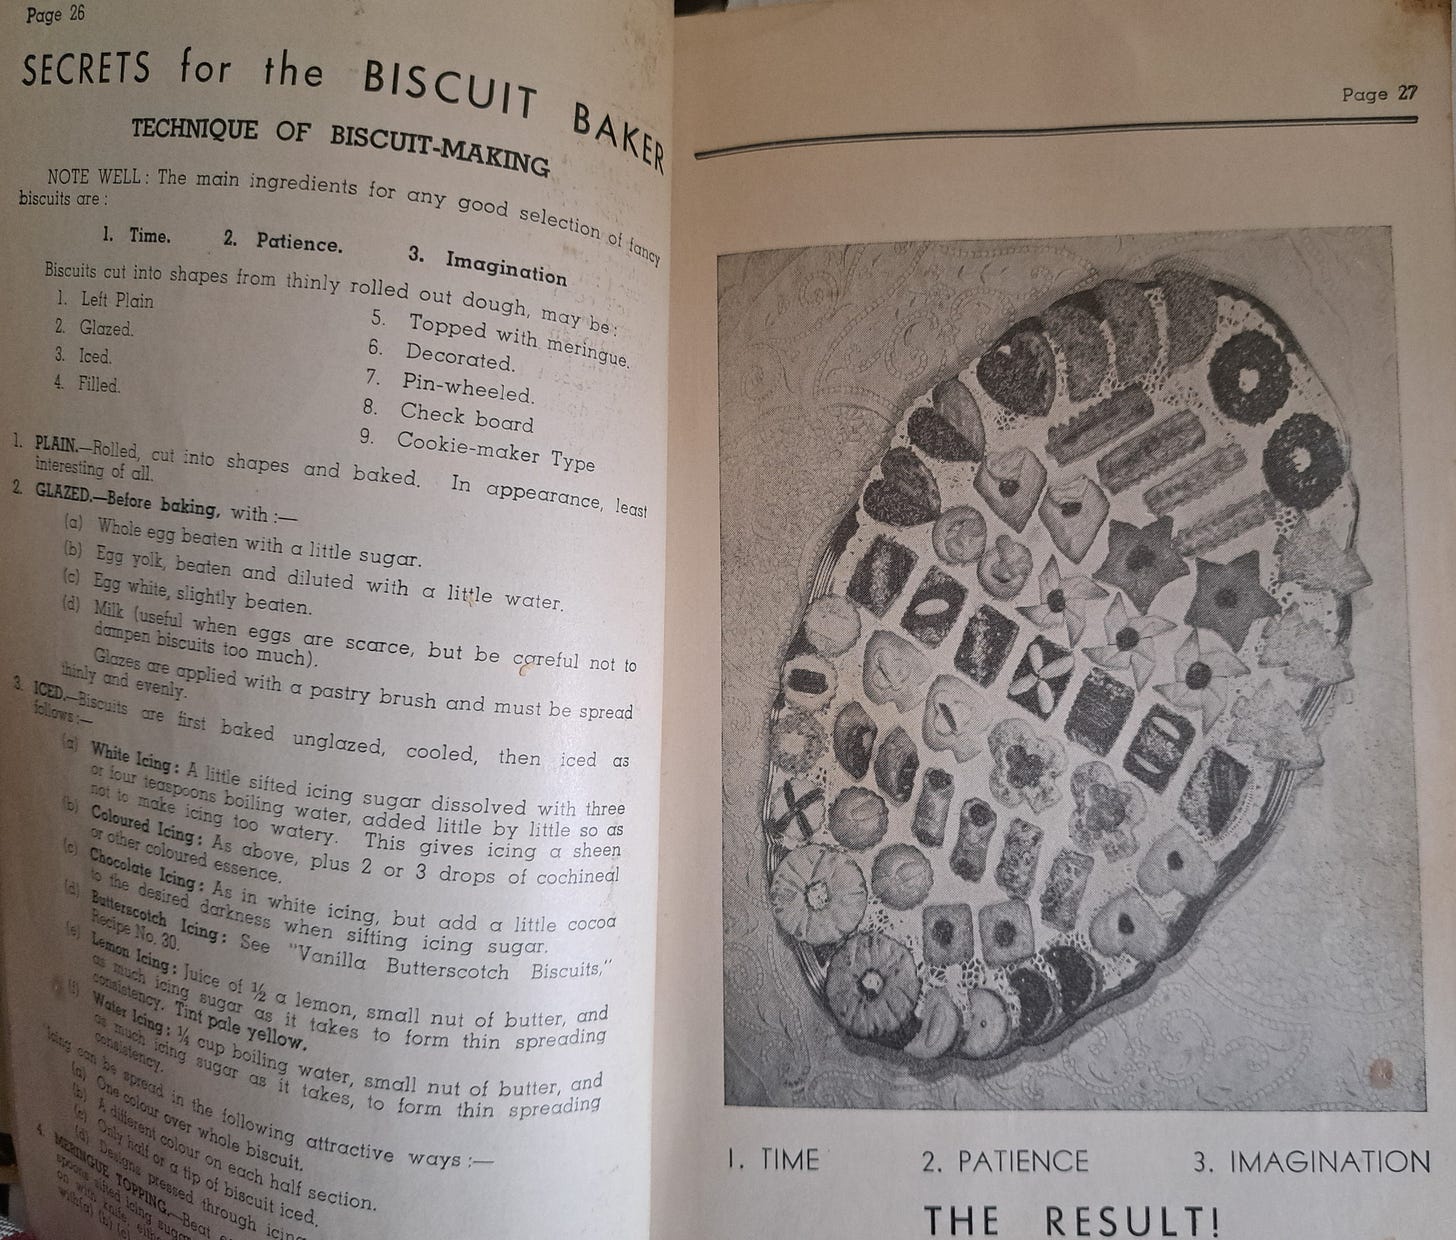 Secrets for the biscuit baker; International Goodwill recipe book